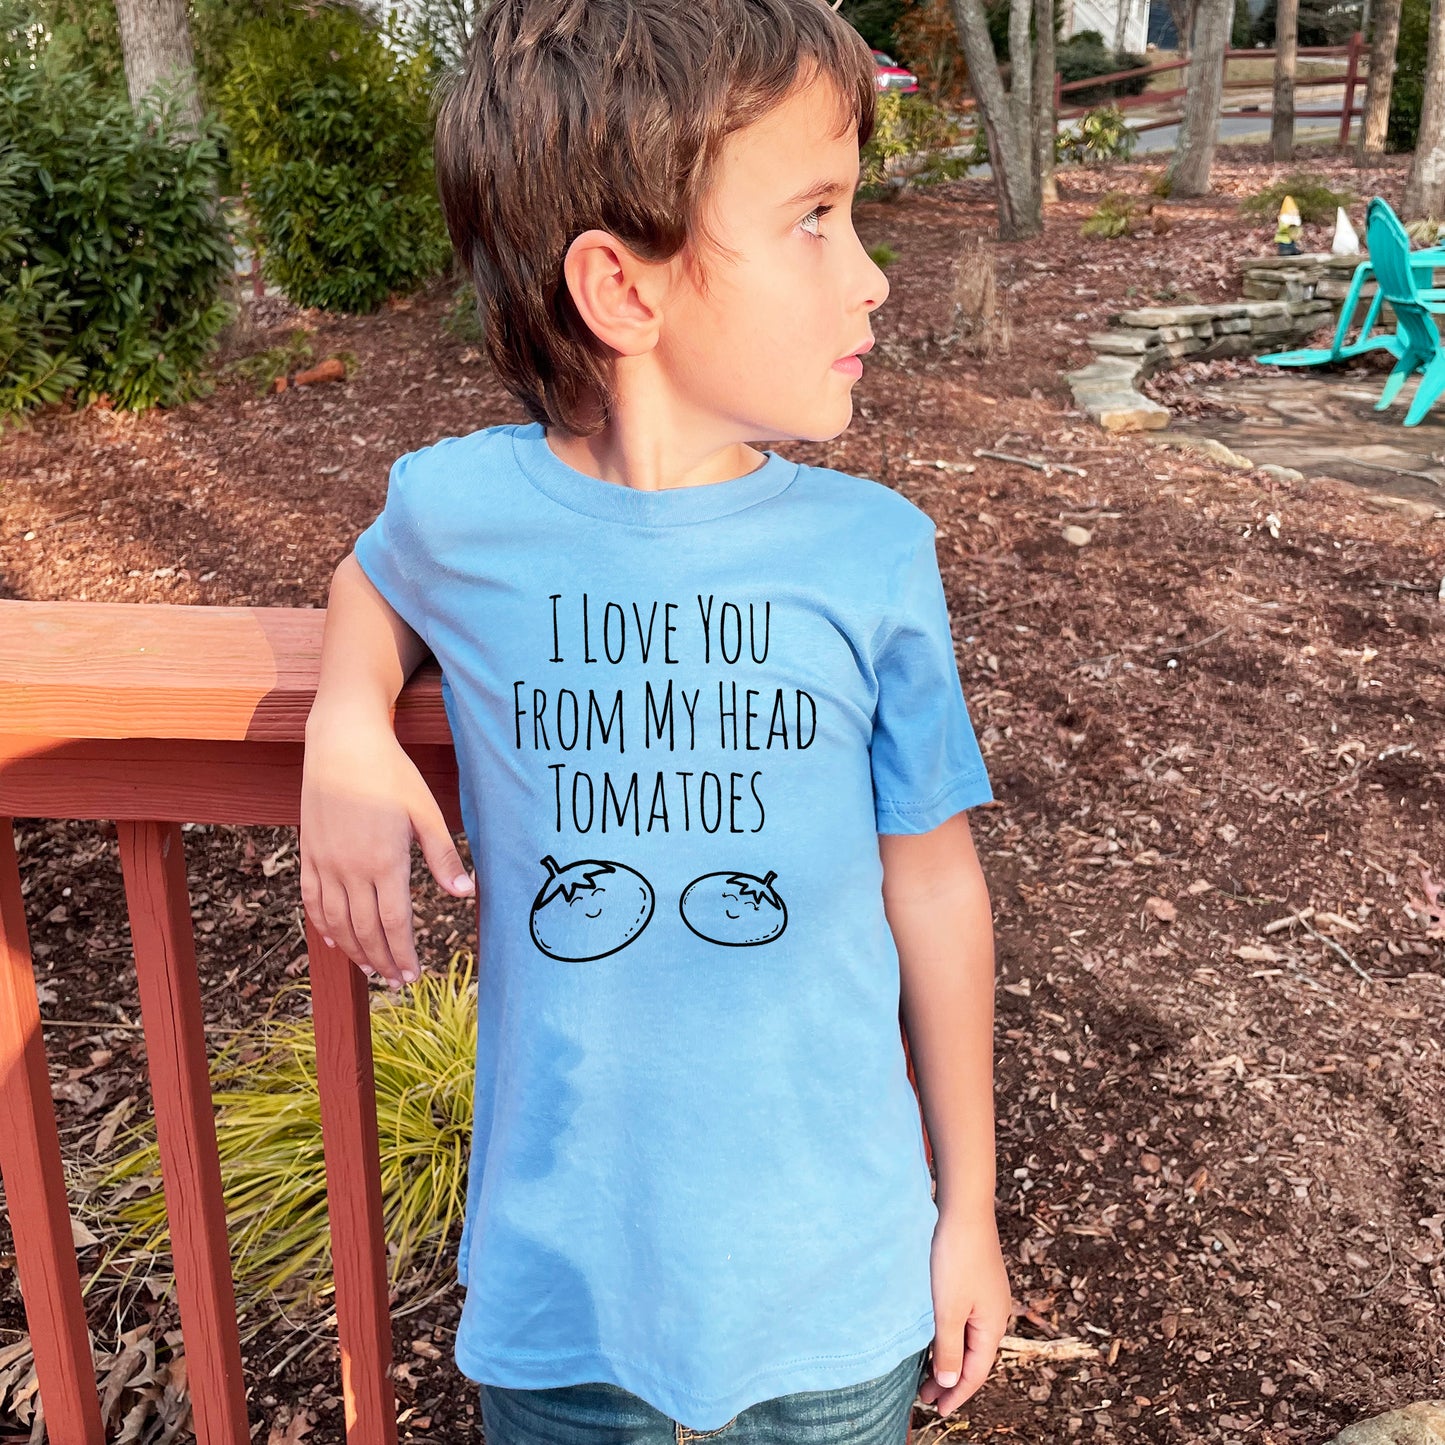 I Love You From My Head Tomatoes - Kid's Tee - Columbia Blue or Lavender